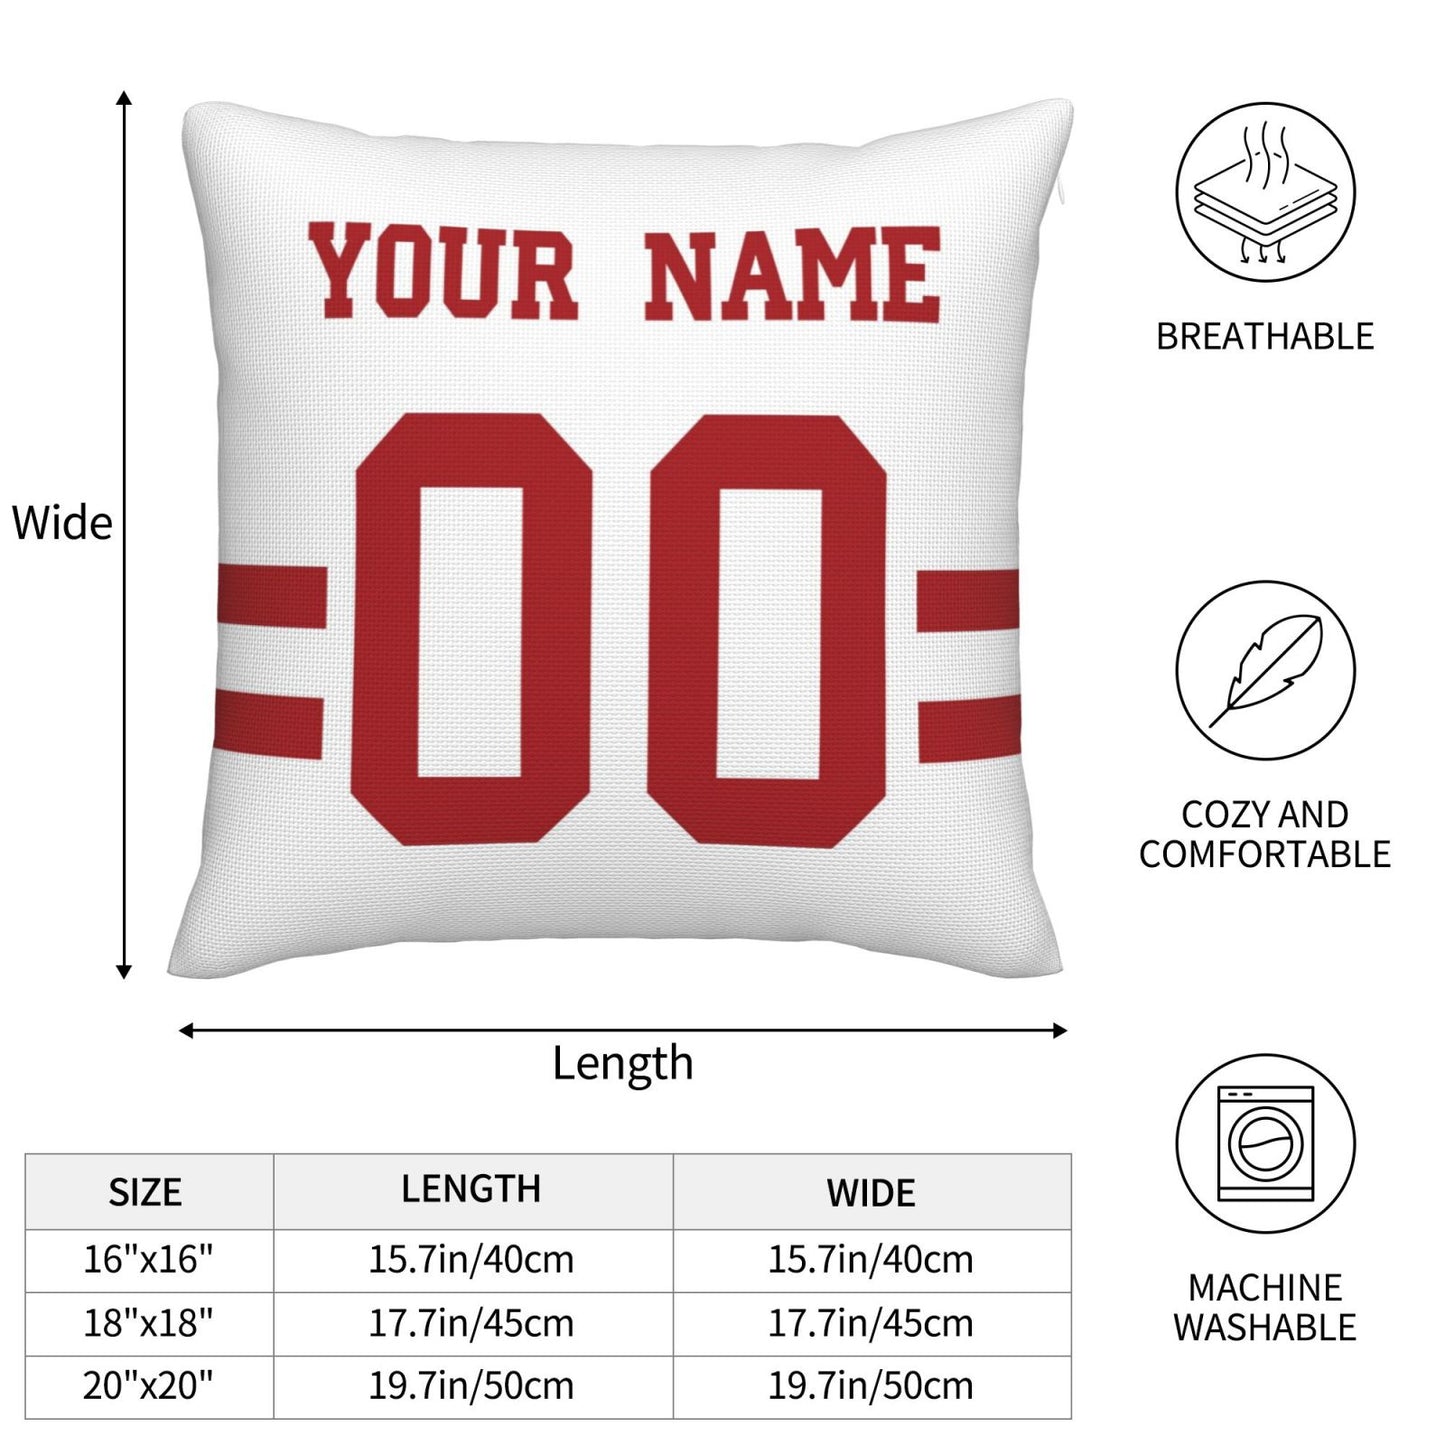 Custom White San Francisco 49ers Decorative Throw Pillow Case - Print Personalized Football Team Fans Name & Number Birthday Gift